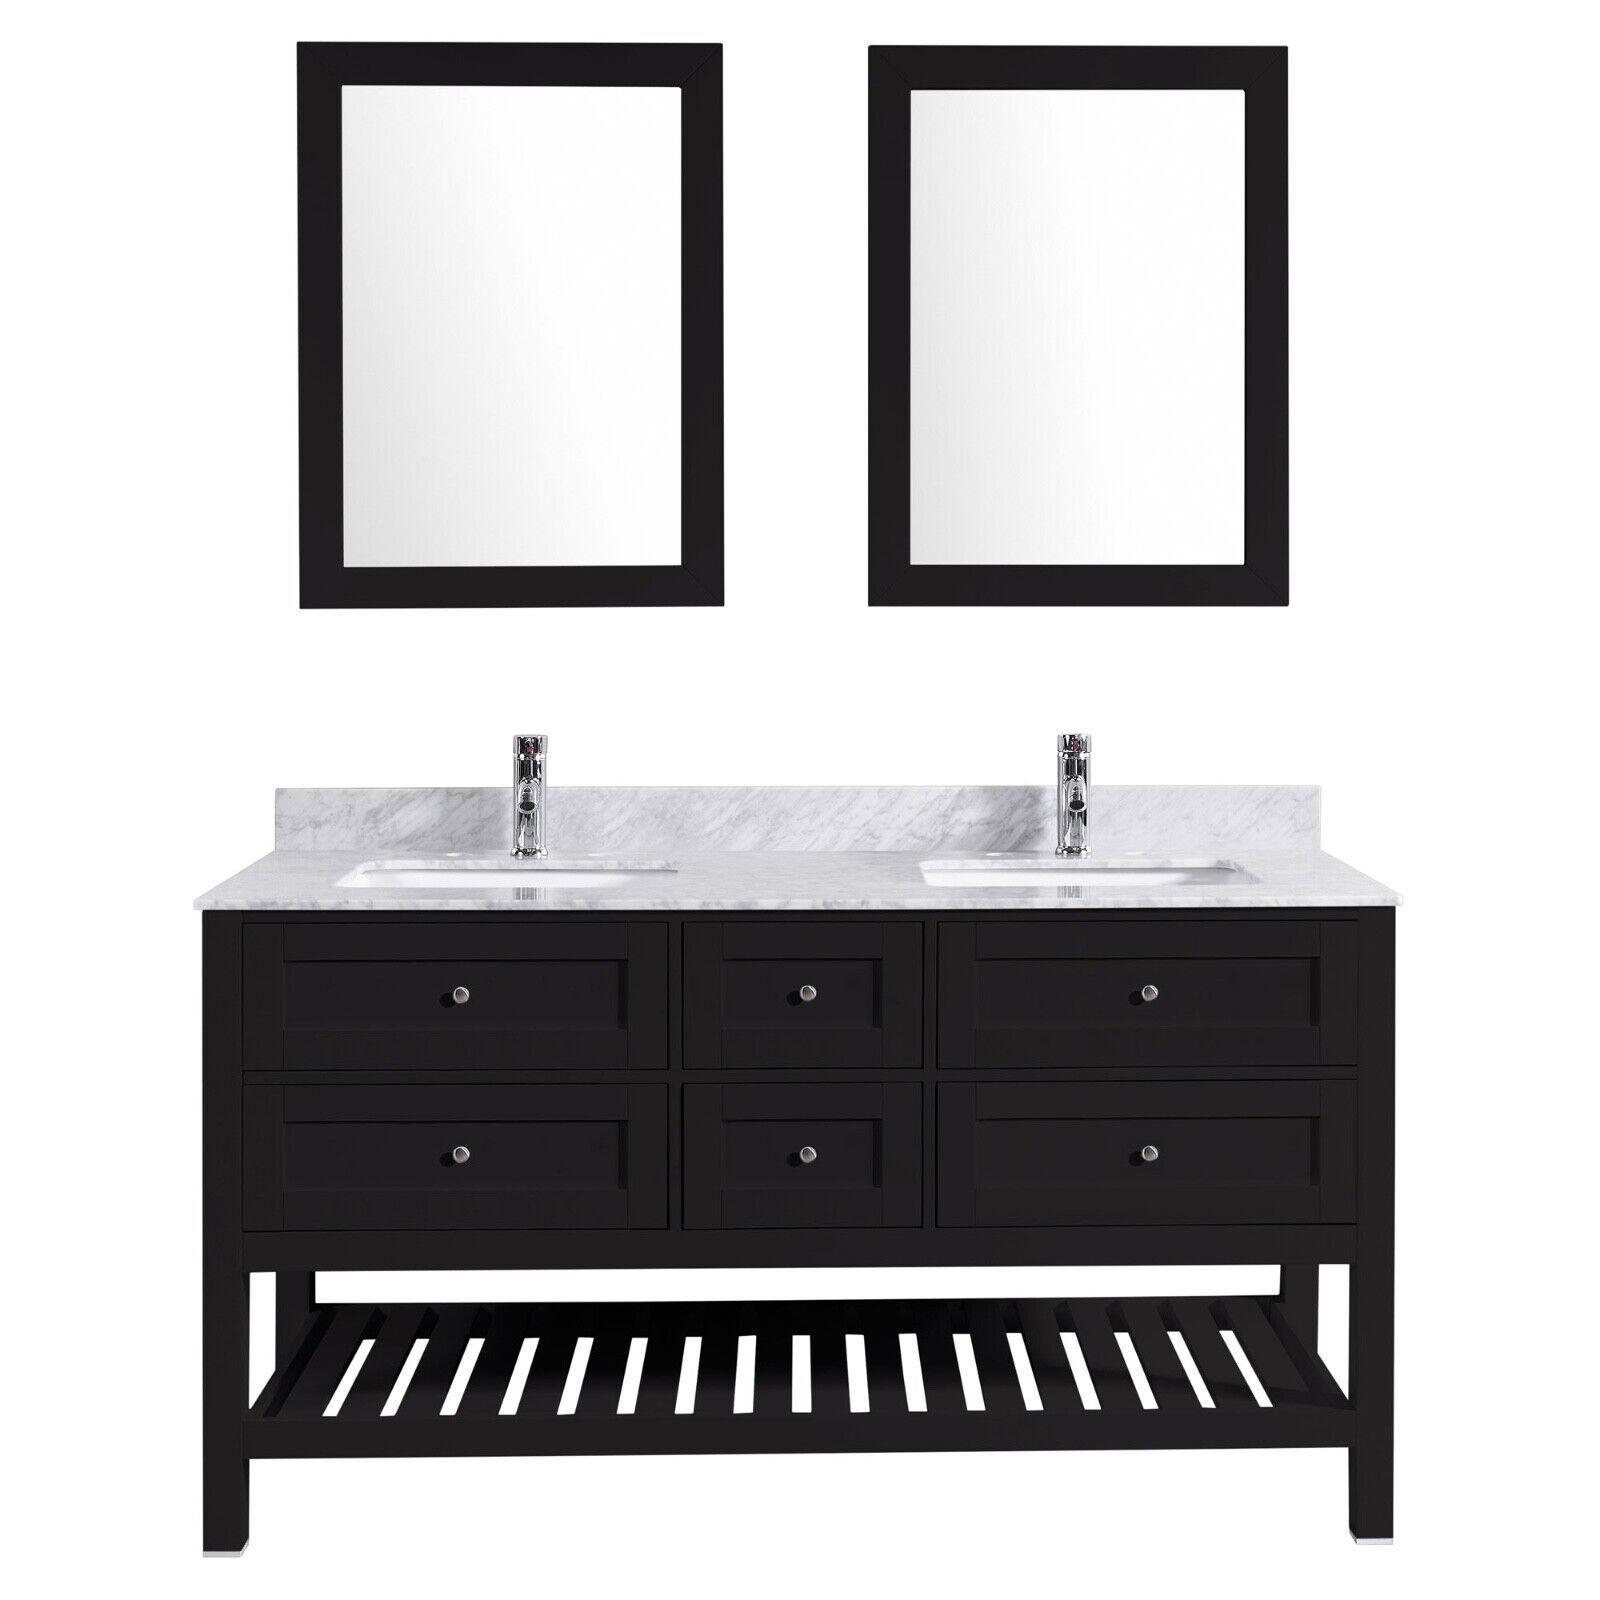 Primary image for 59" Vanity Cabinet Set with Mirror Black LV6-60B by LessCare